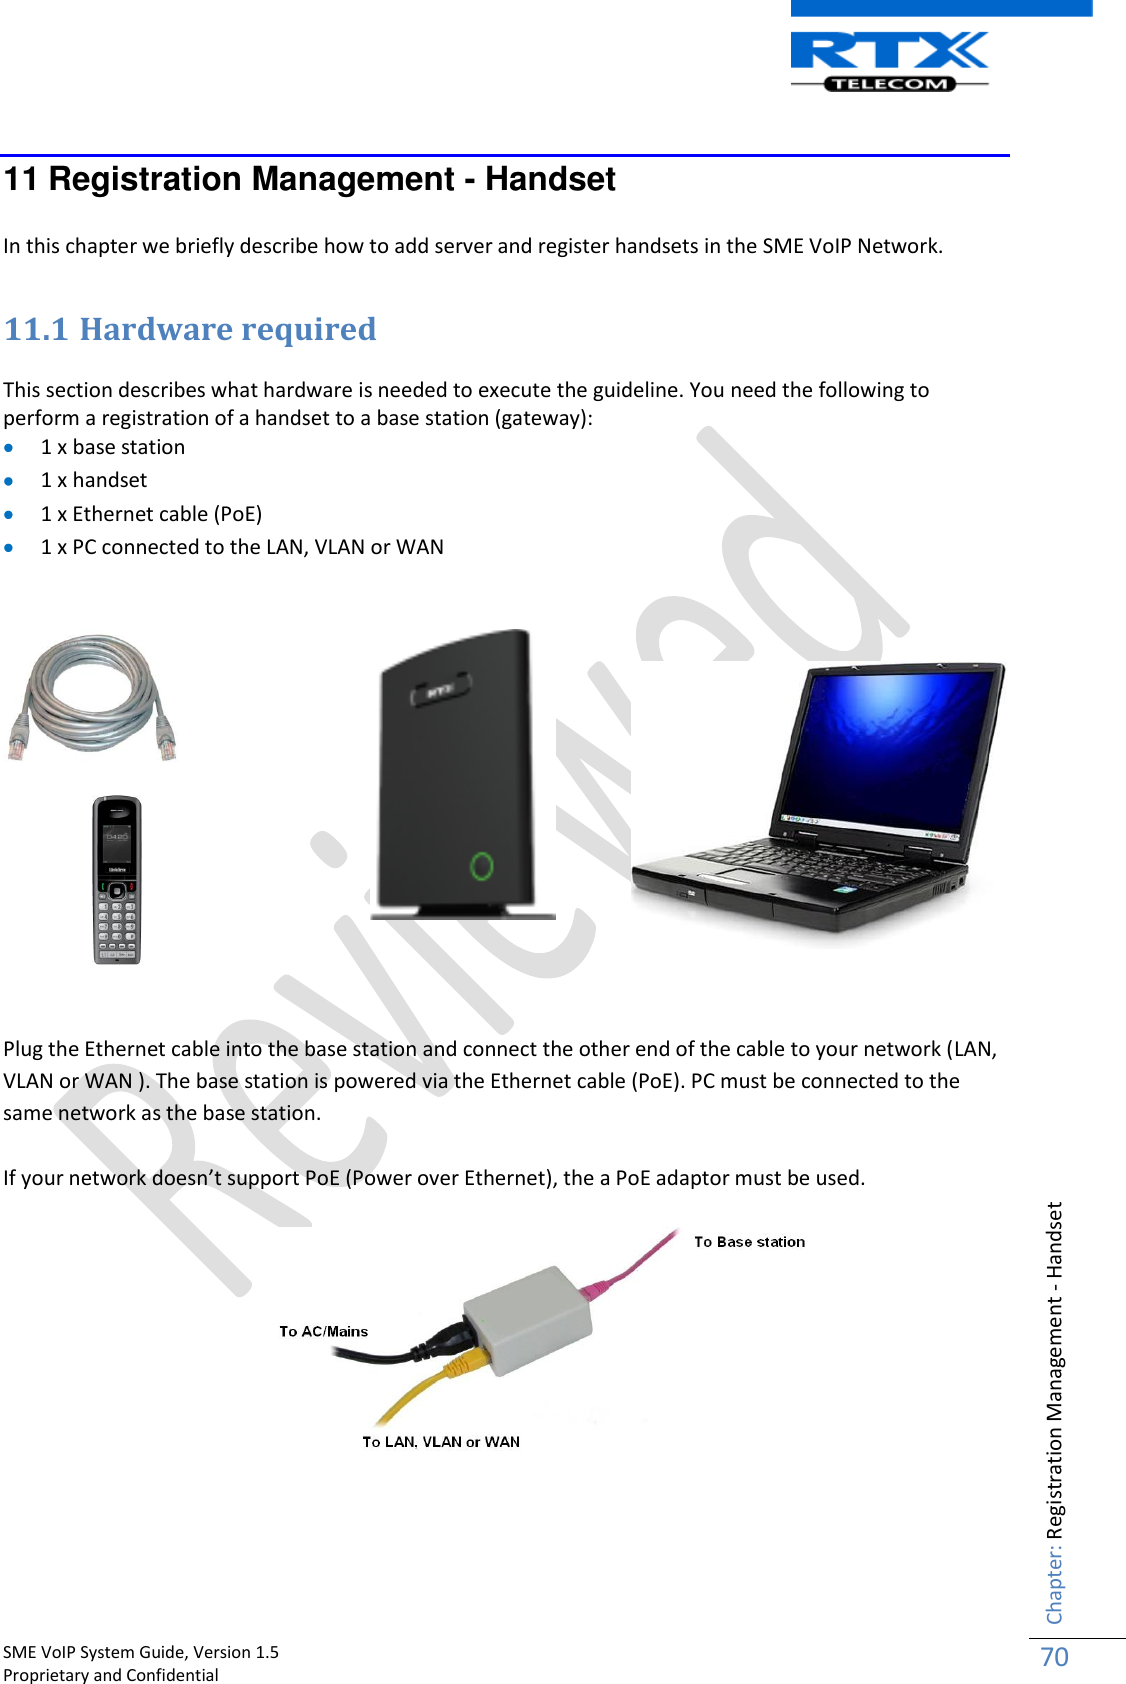    SME VoIP System Guide, Version 1.5                                                                                                                                                          Proprietary and Confidential    Chapter: Registration Management - Handset 70  11 Registration Management - Handset  In this chapter we briefly describe how to add server and register handsets in the SME VoIP Network.  11.1 Hardware required  This section describes what hardware is needed to execute the guideline. You need the following to perform a registration of a handset to a base station (gateway):  1 x base station  1 x handset  1 x Ethernet cable (PoE)  1 x PC connected to the LAN, VLAN or WAN        Plug the Ethernet cable into the base station and connect the other end of the cable to your network (LAN, VLAN or WAN ). The base station is powered via the Ethernet cable (PoE). PC must be connected to the same network as the base station.  If your network doesn’t support PoE (Power over Ethernet), the a PoE adaptor must be used.      